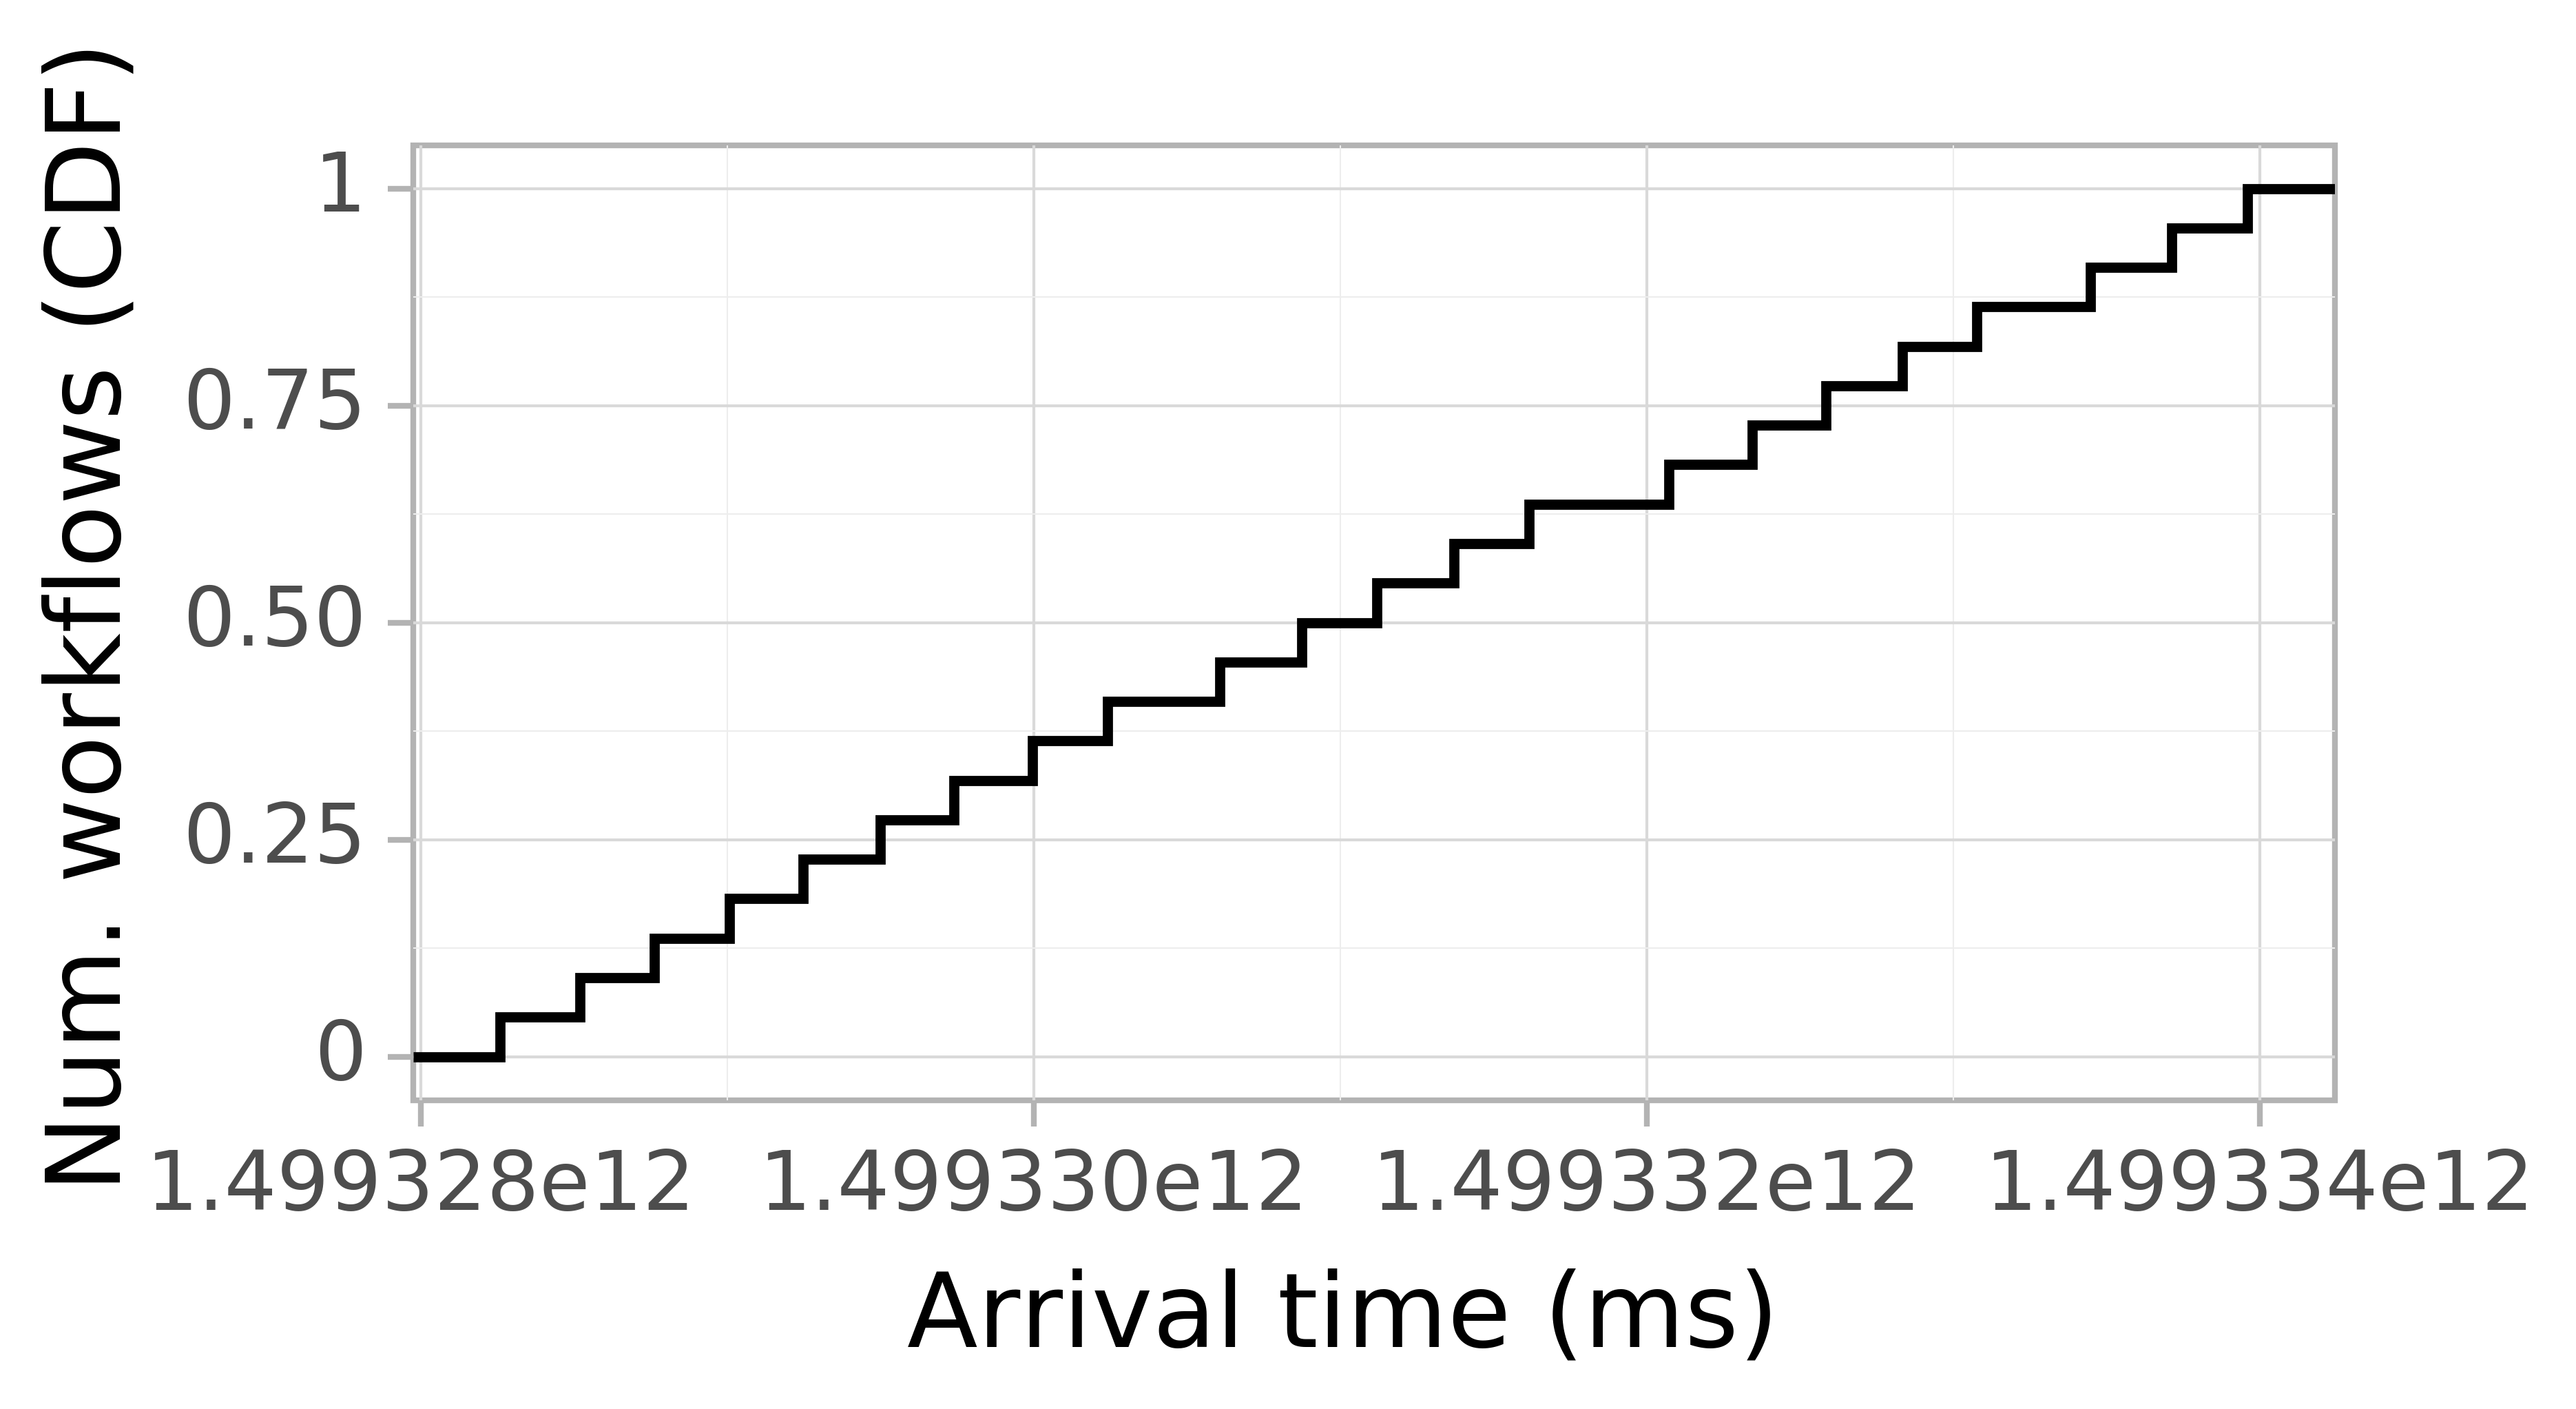 Job arrival CDF graph for the askalon-new_ee24 trace.